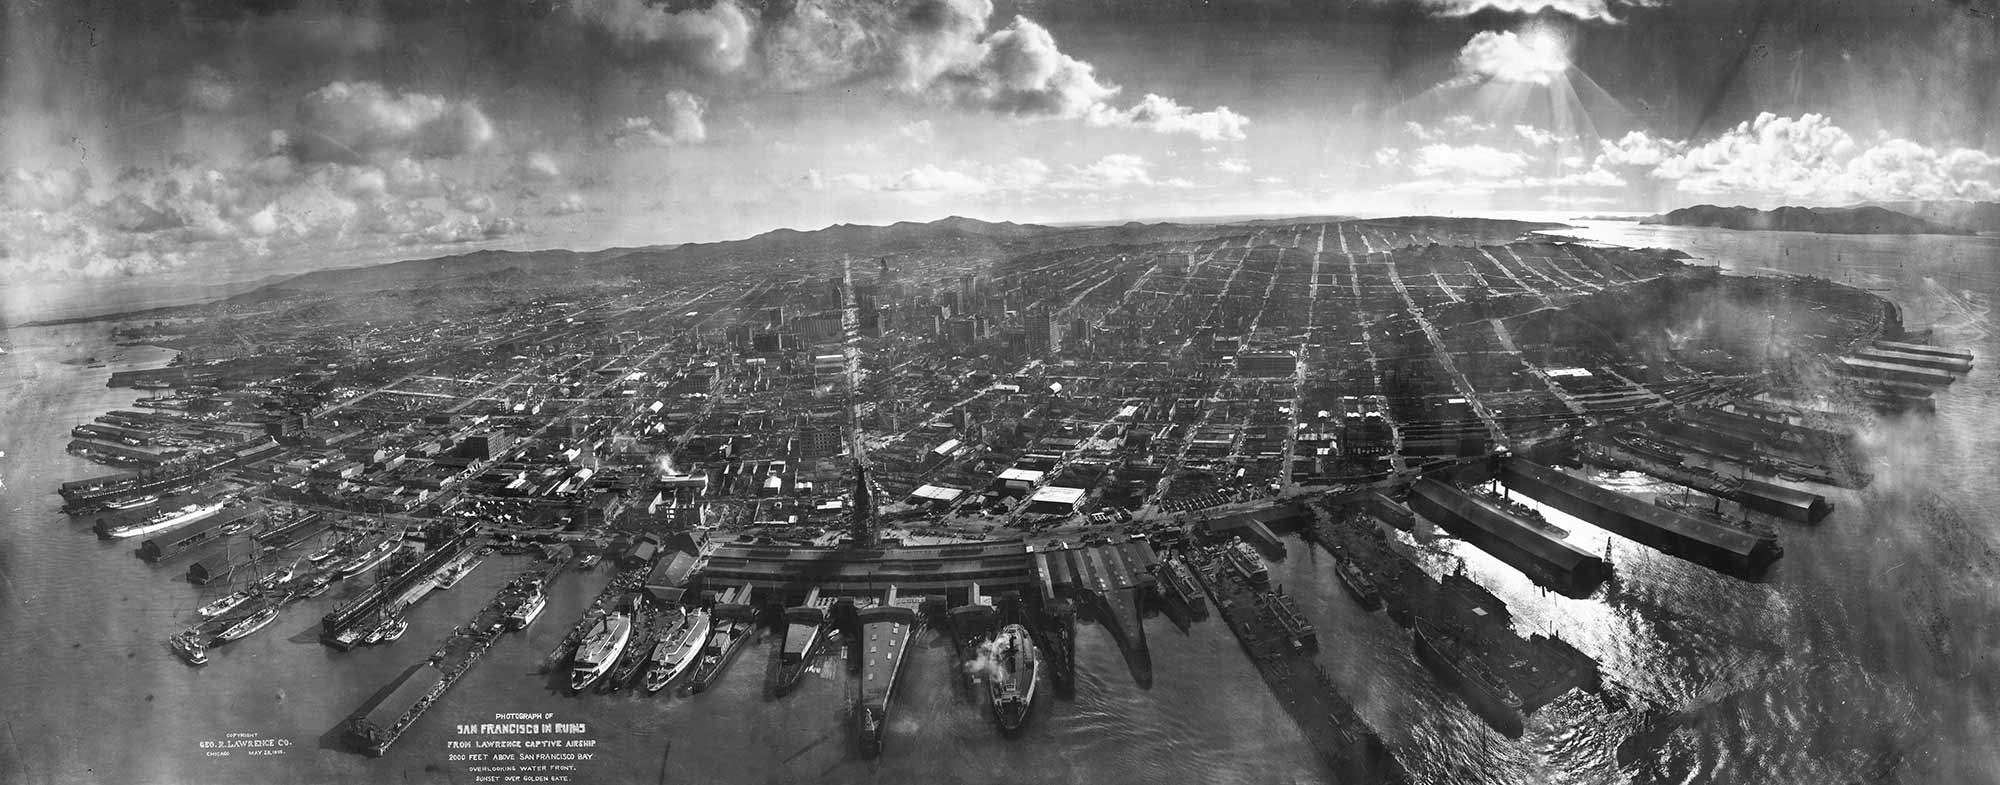 Aerial photo of San Francisco by George Lawrence